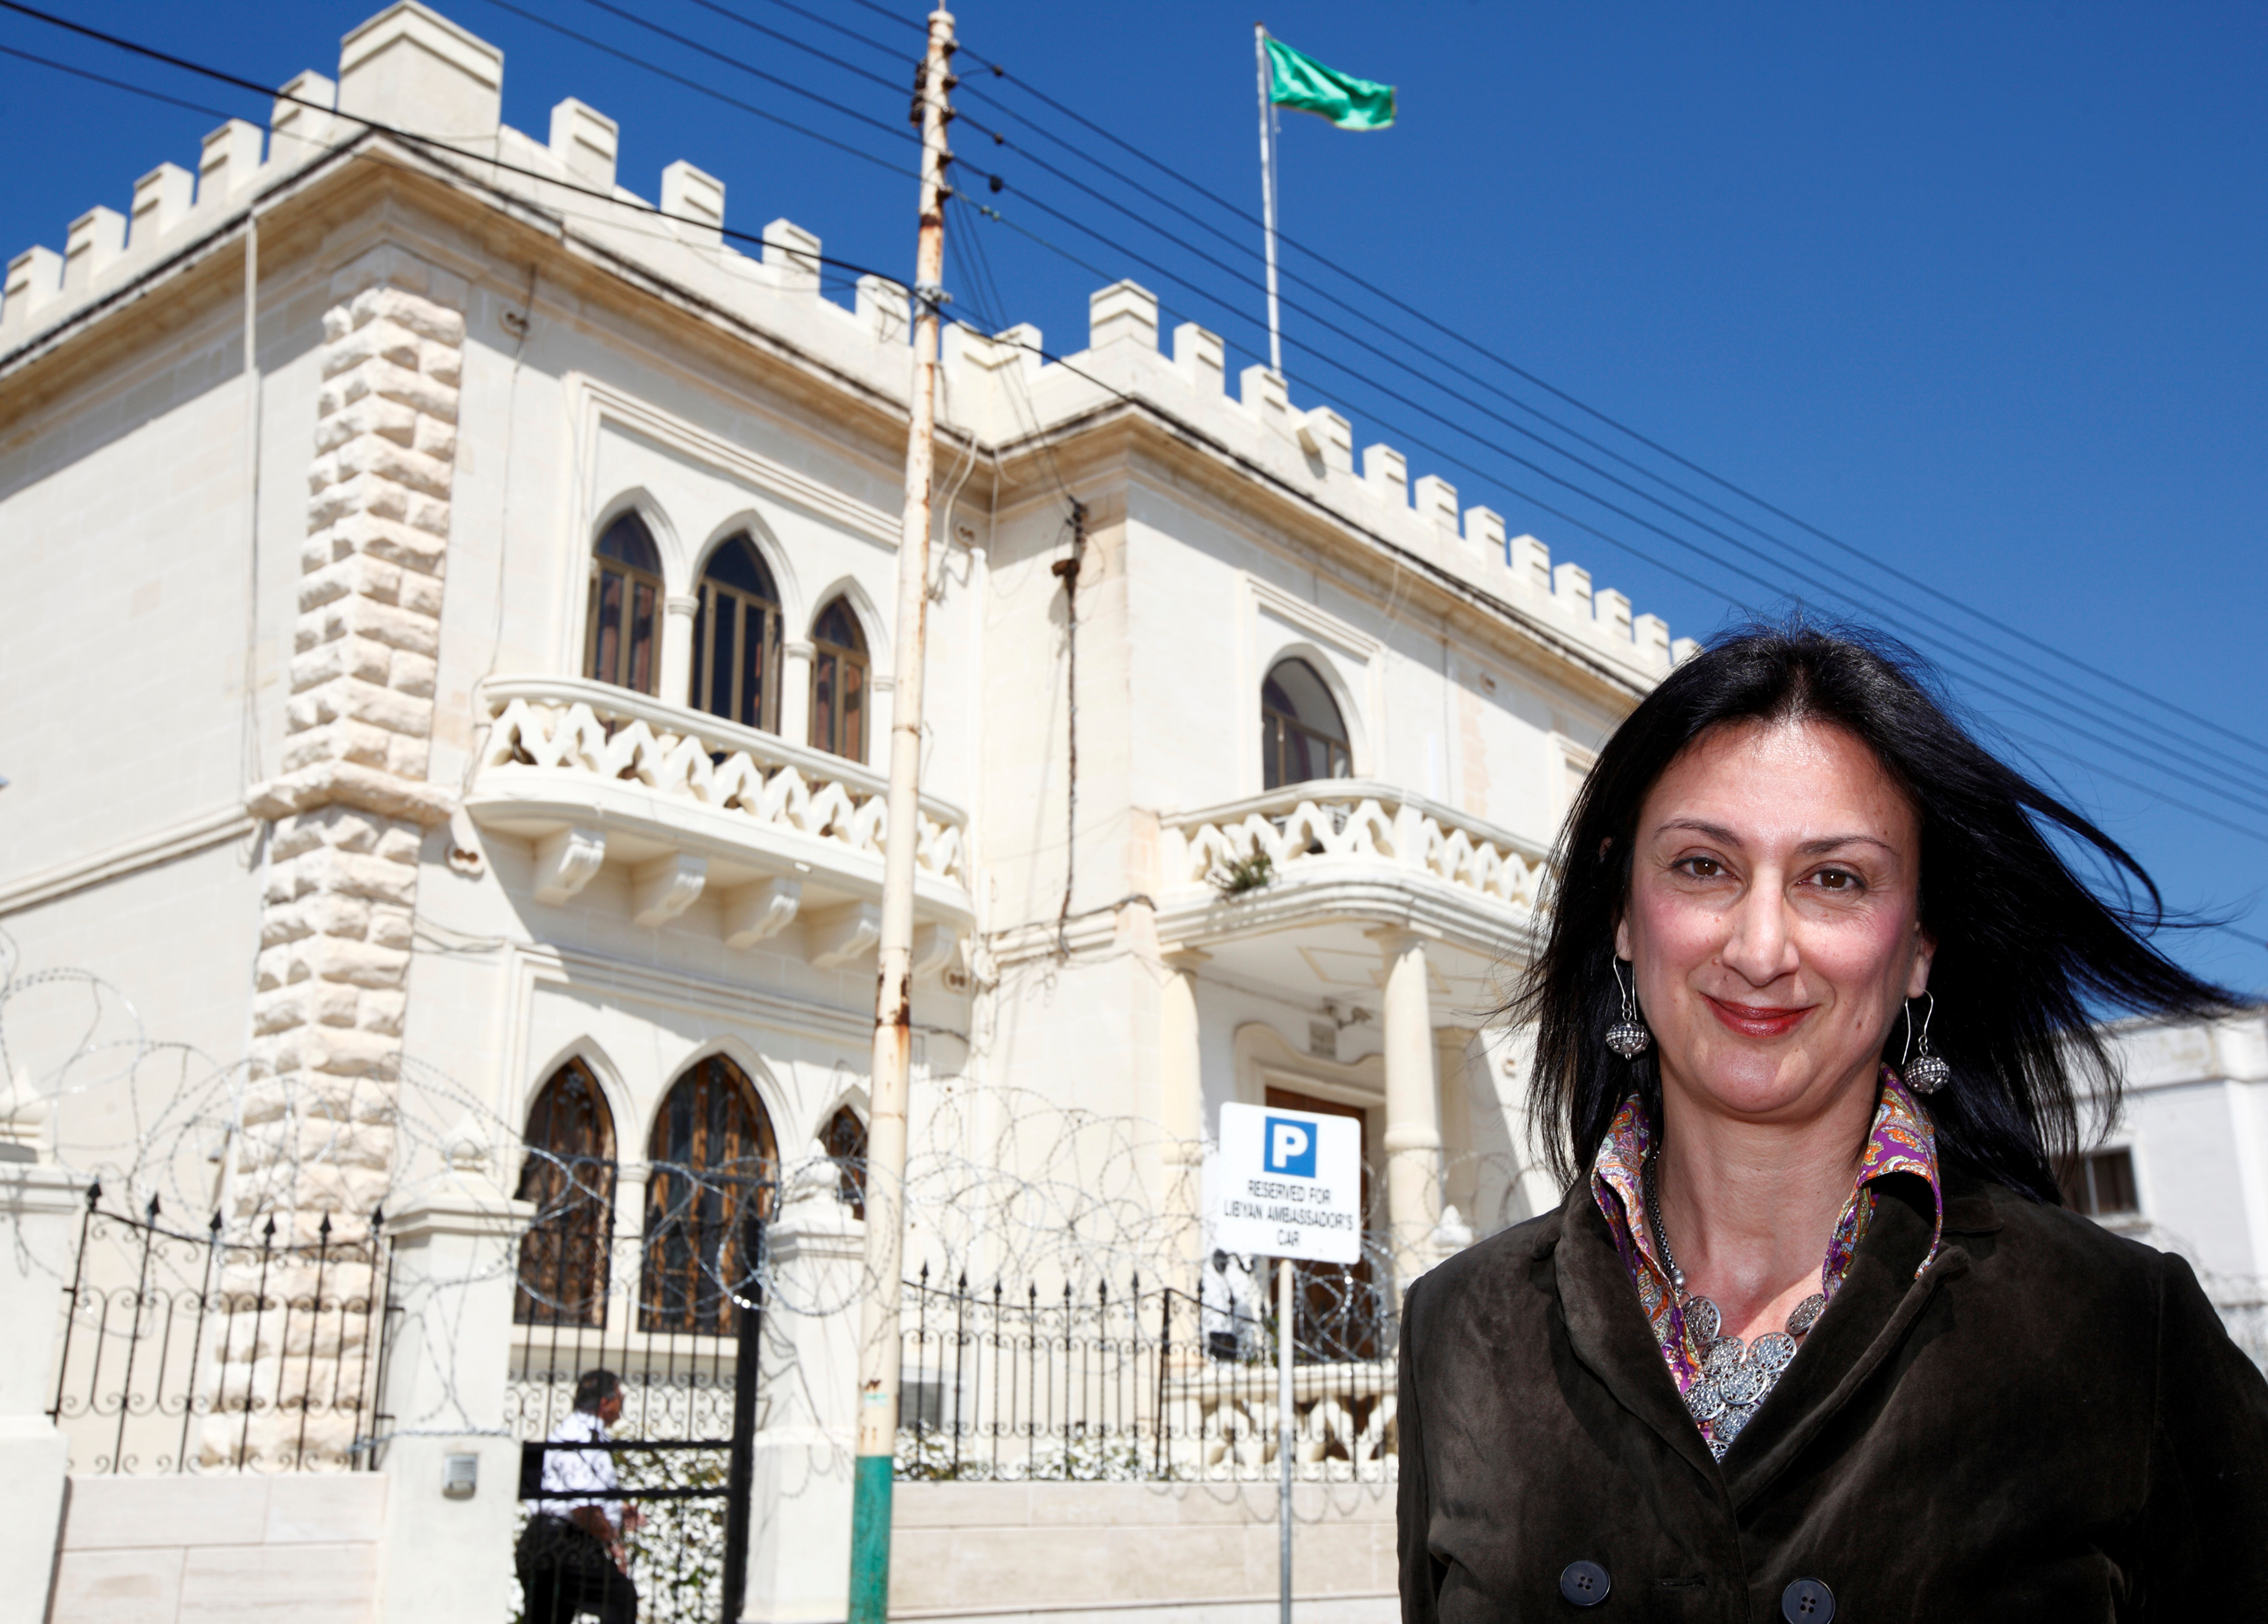 Maltese investigative journalist Daphne Caruana Galizia poses outside the Libyan Embassy in Valletta, Malta, in 2011. The investigative journalist was killed in a car bombing in October 2017